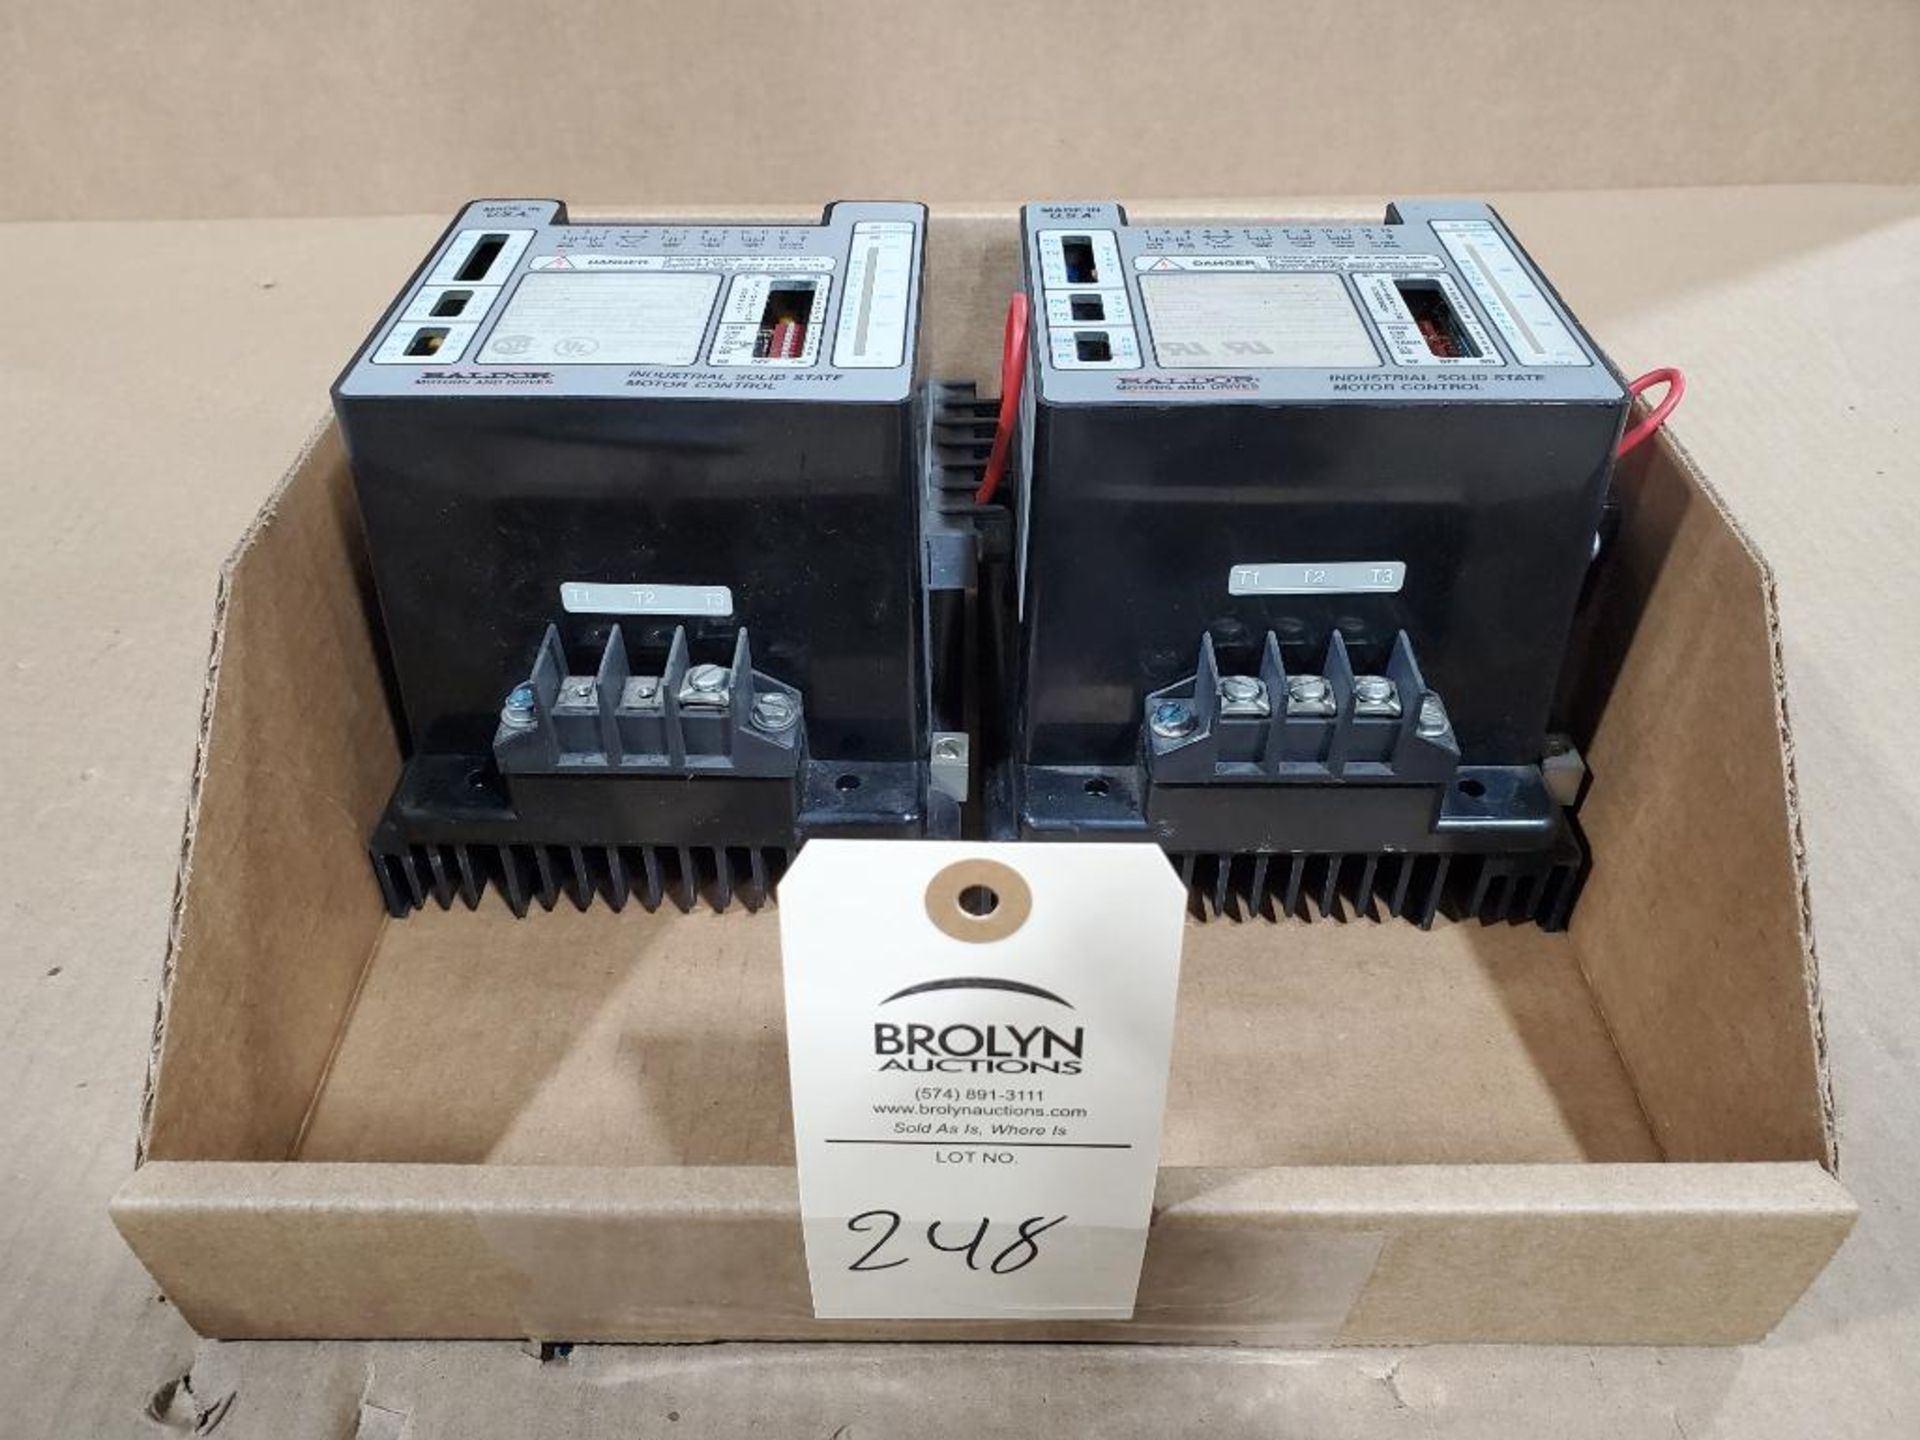 Qty 2 - Baldor Industrial Solid State Motor Control. Catalog MA7008.